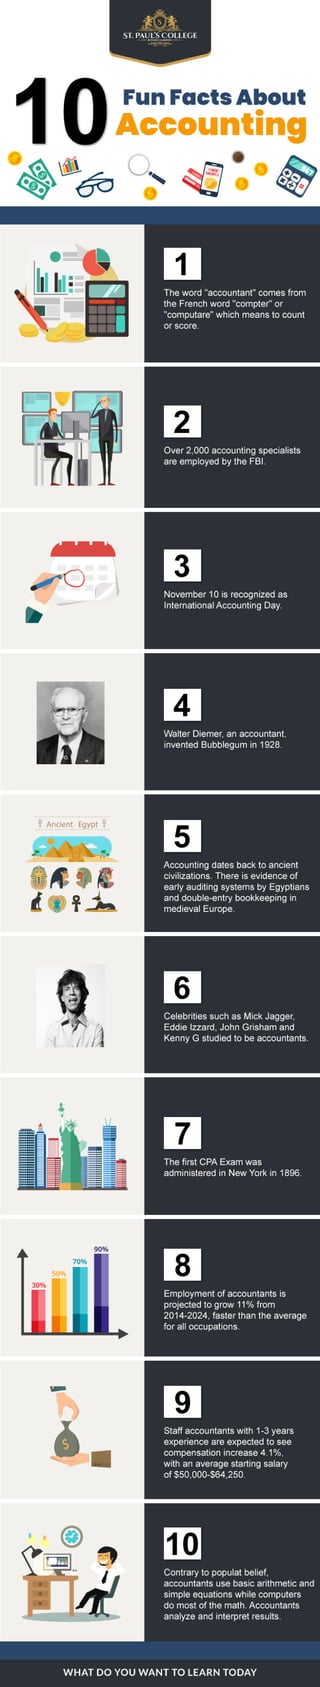 10 fun facts about accounting